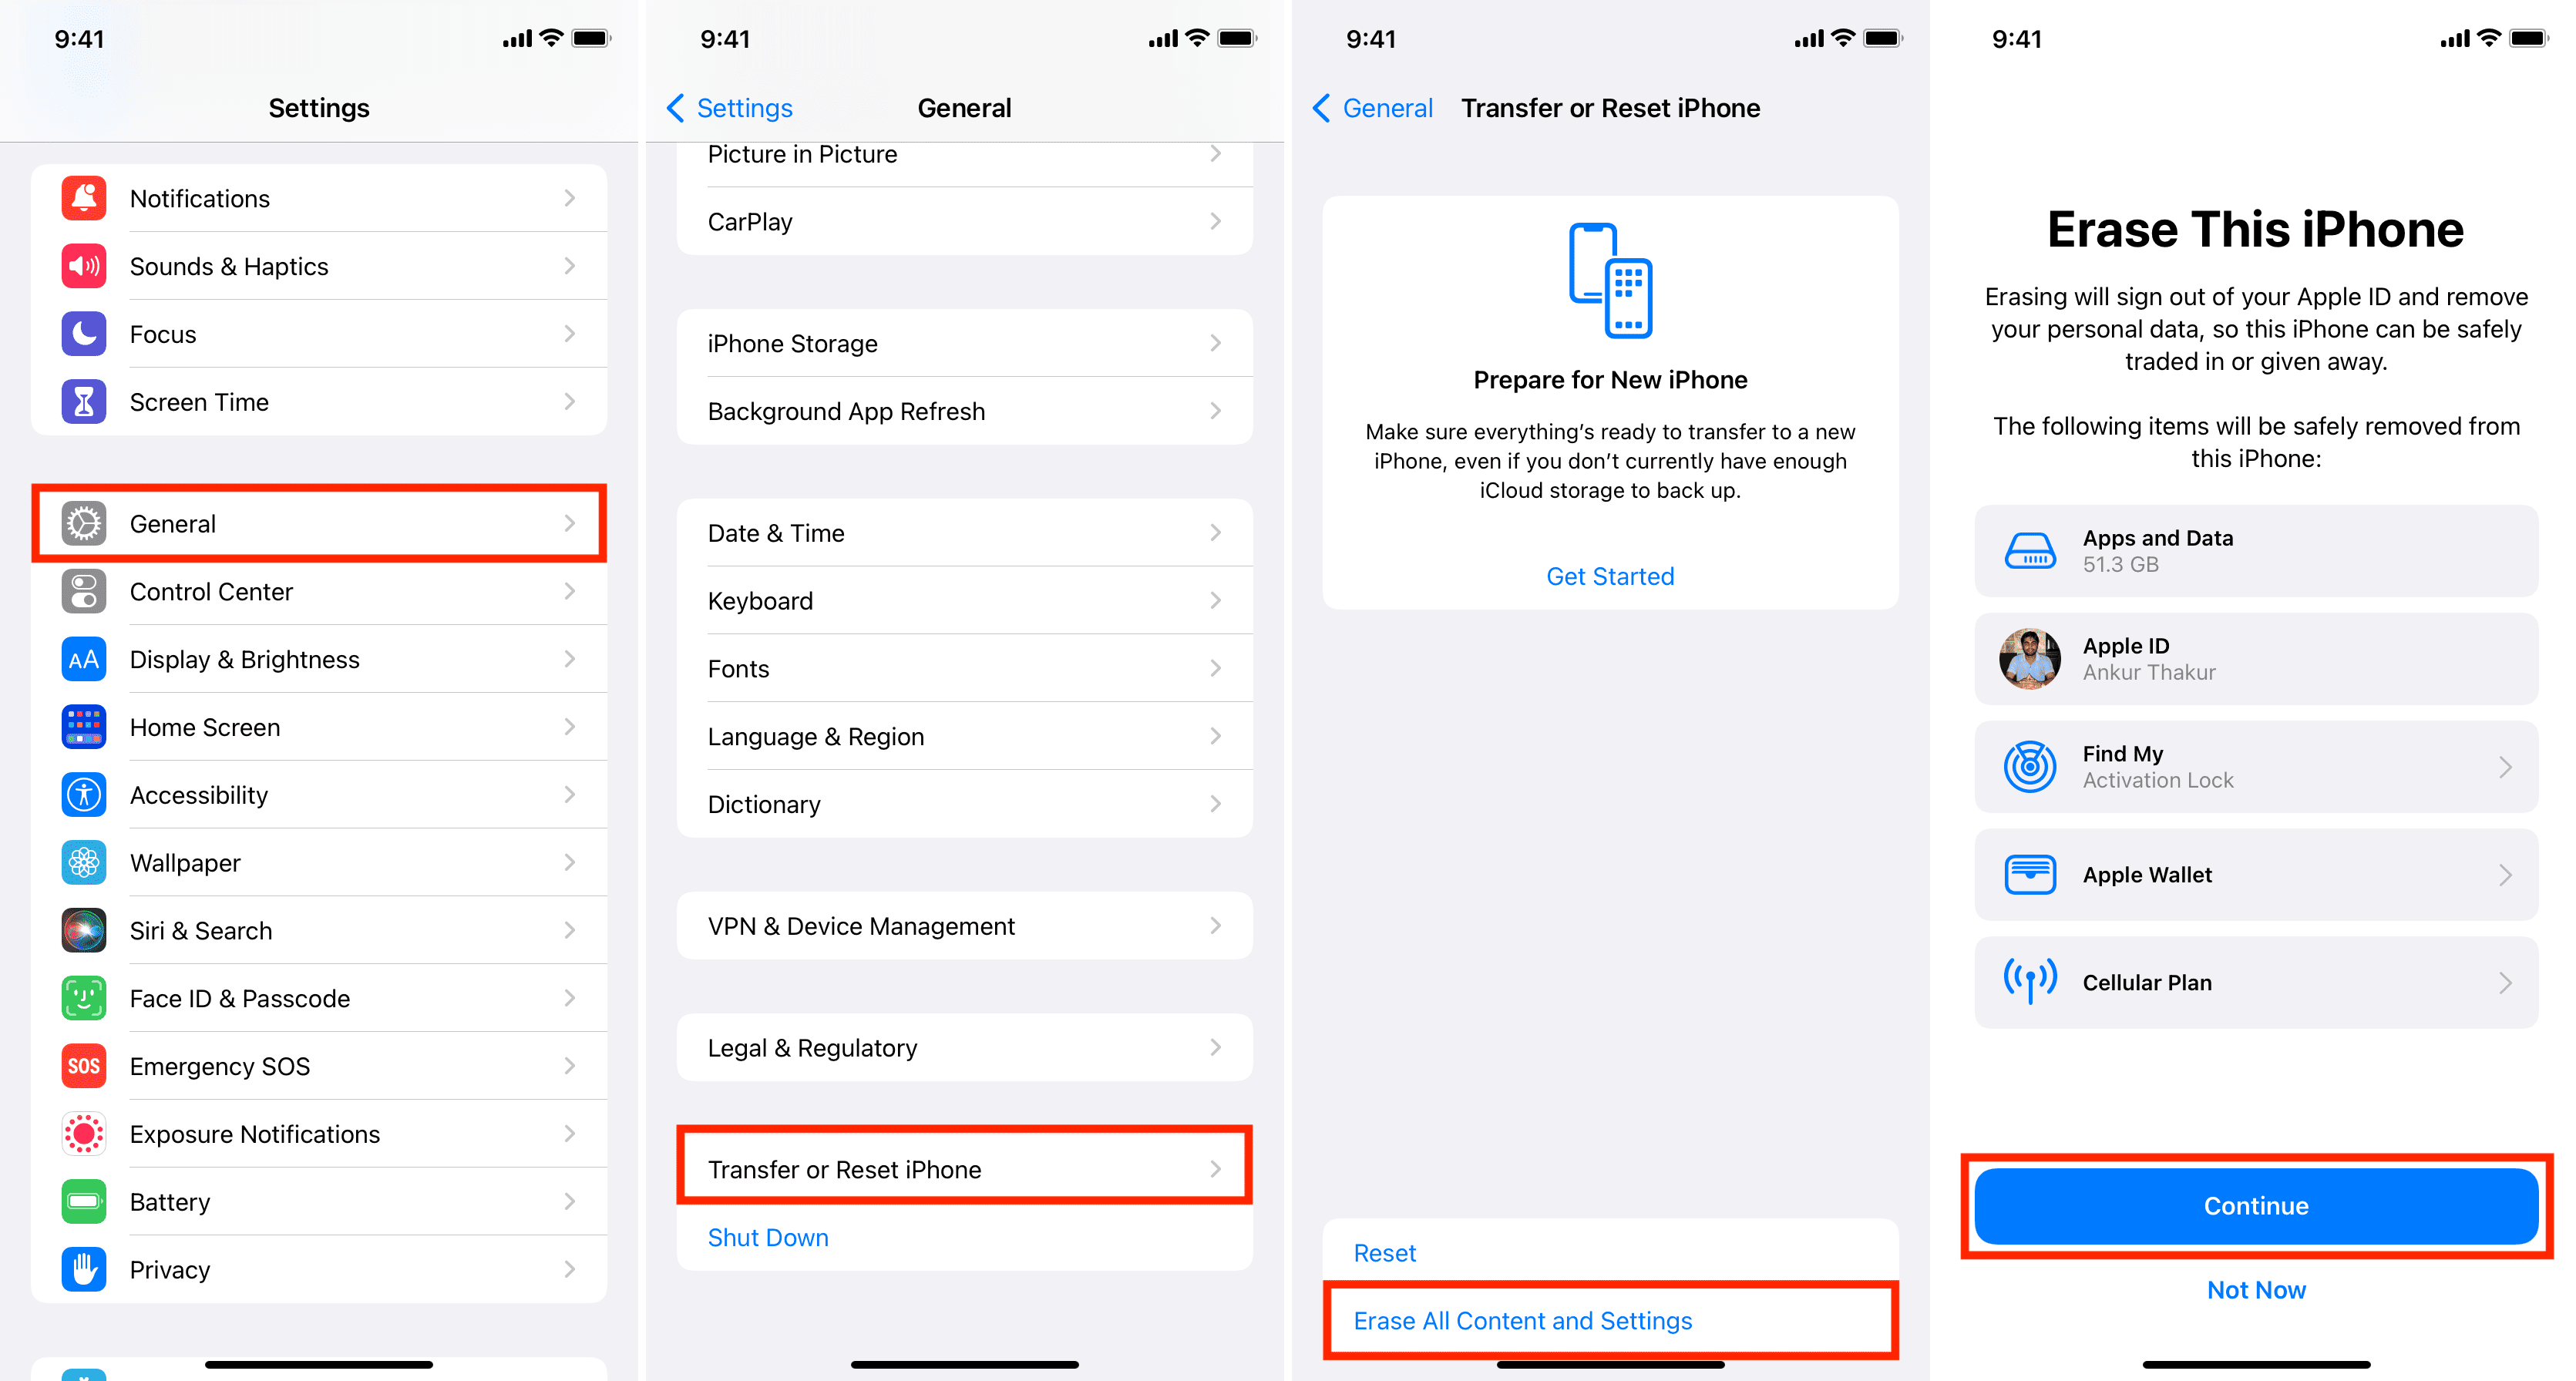 Steps to Erase All Content and Settings on iPhone